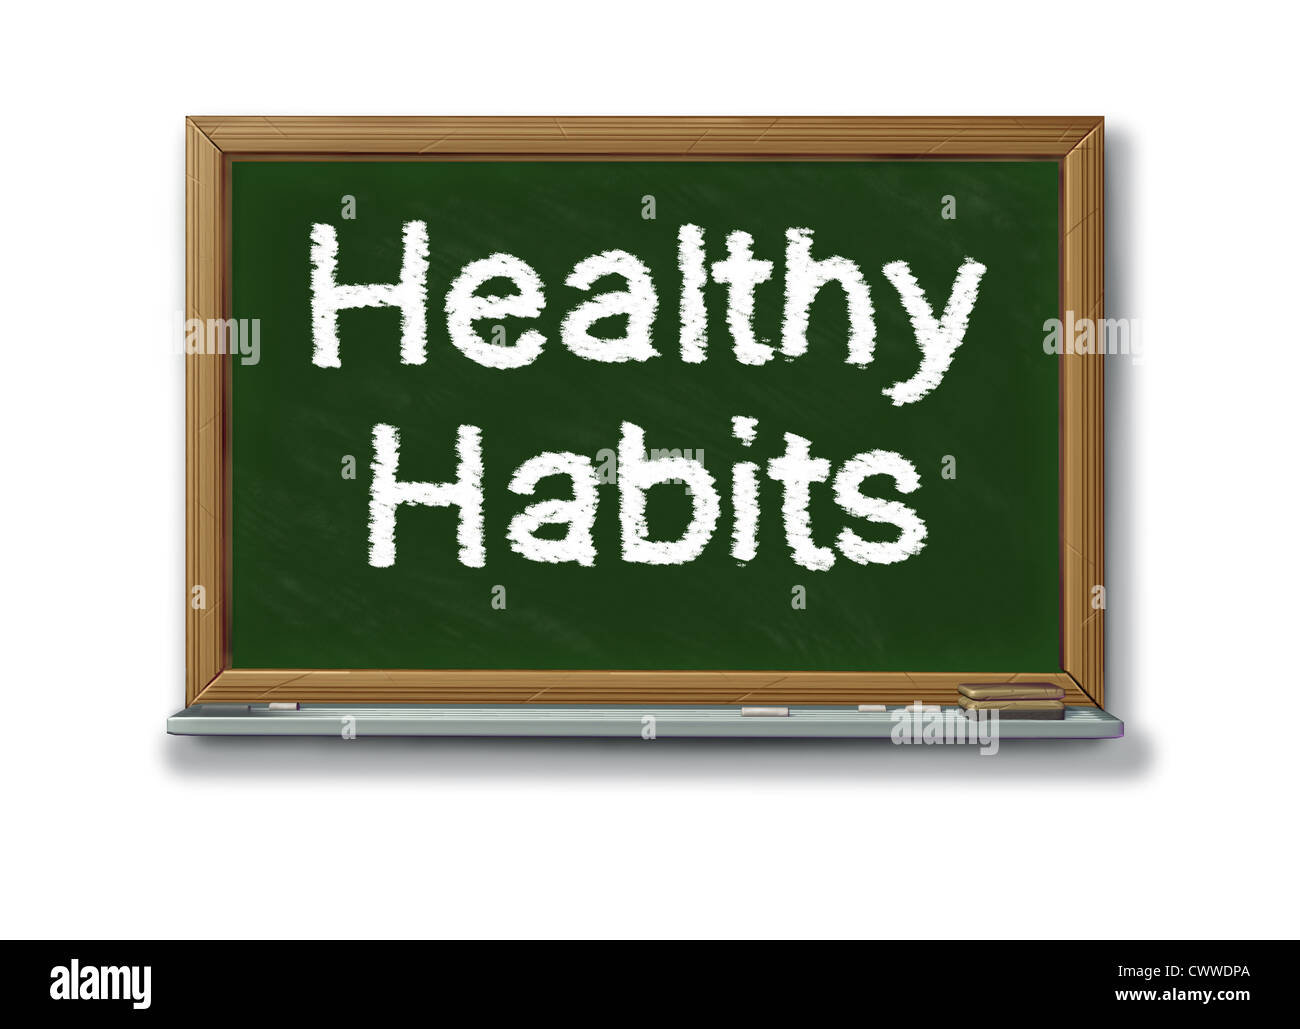 Healthy habits on a school black board representing the concept of good health oriented behavior routine that involves mental and phisical health choices for human well being and a successful lifestyle. Stock Photo